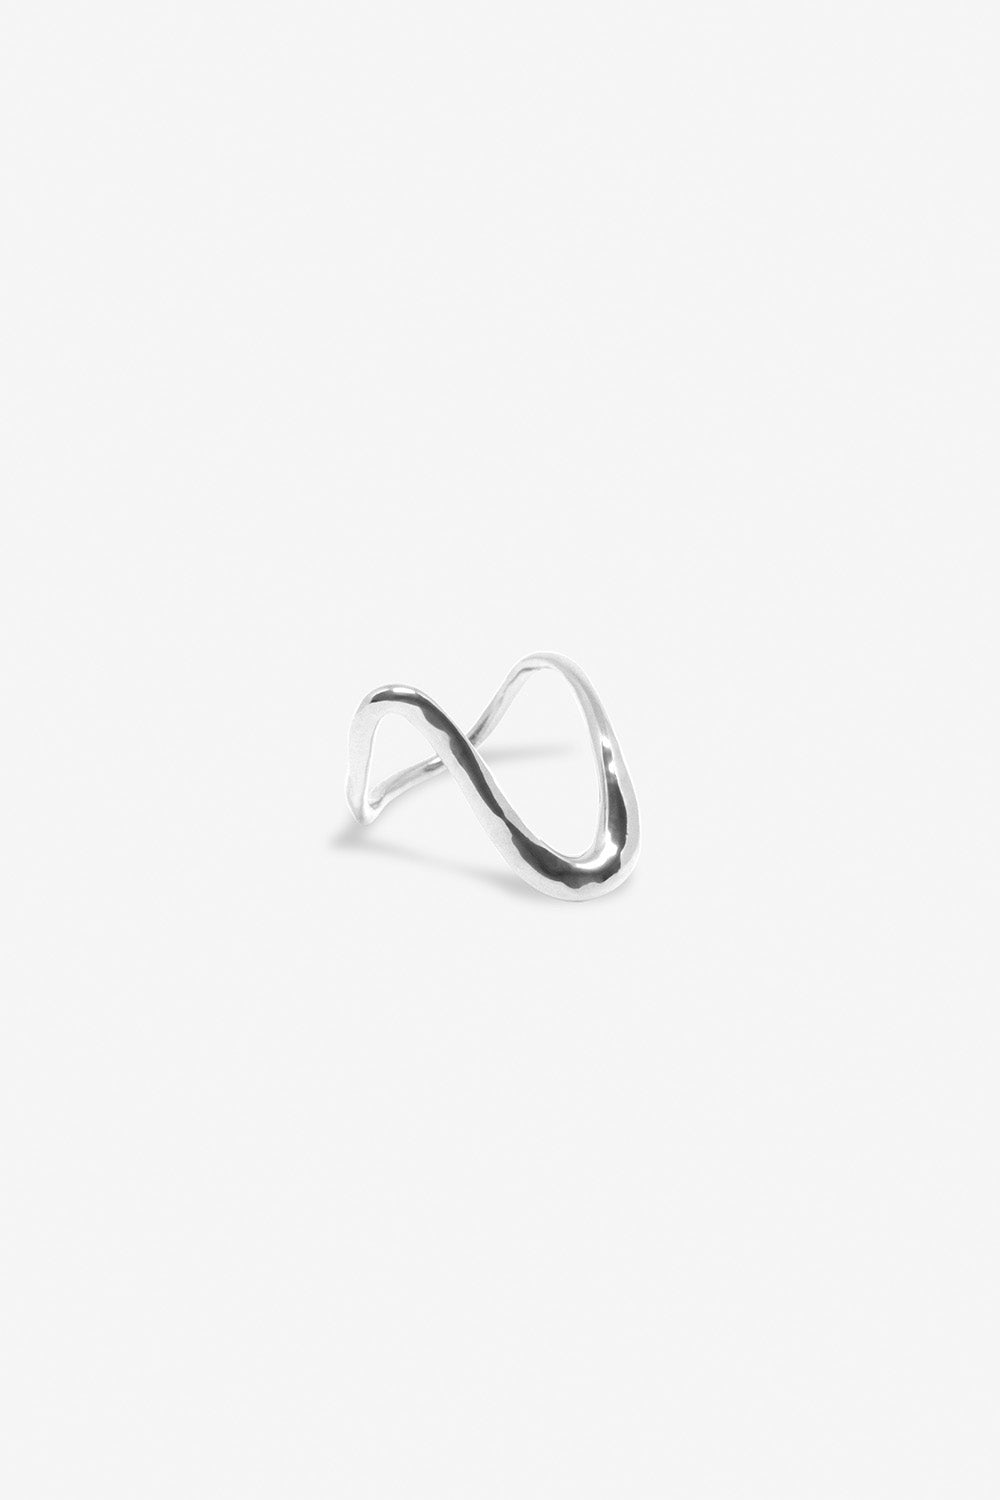 Swirl Ring - Large - Sterling Silver